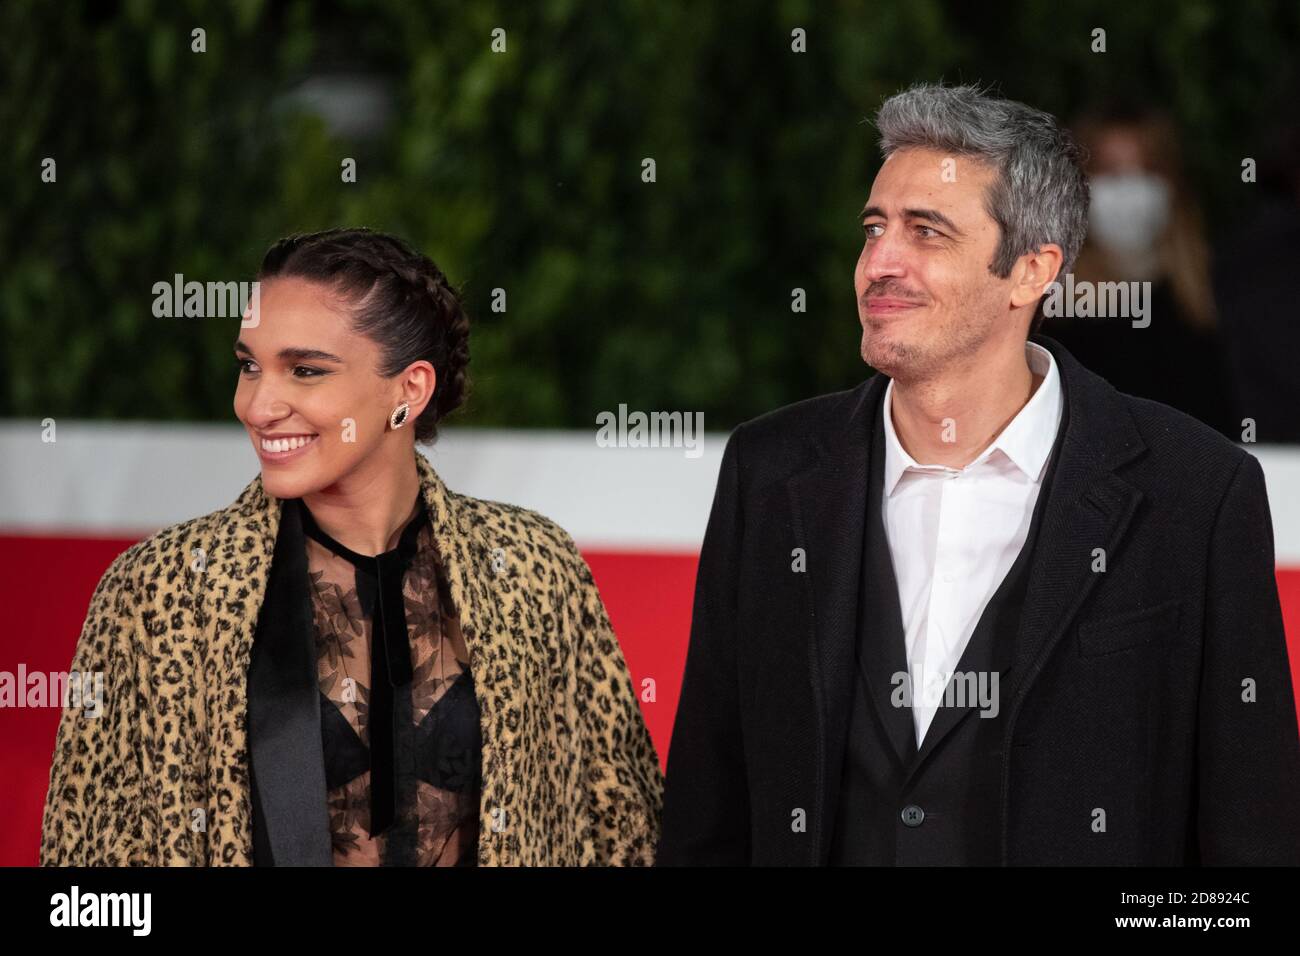 Roma, Oct, 15, 2020, Pif (real name Pierfrancesco Diliberto) with his wife Giulia Innocenzi attendson the red carpet of Roma Film Feast 2020 Stock Photo